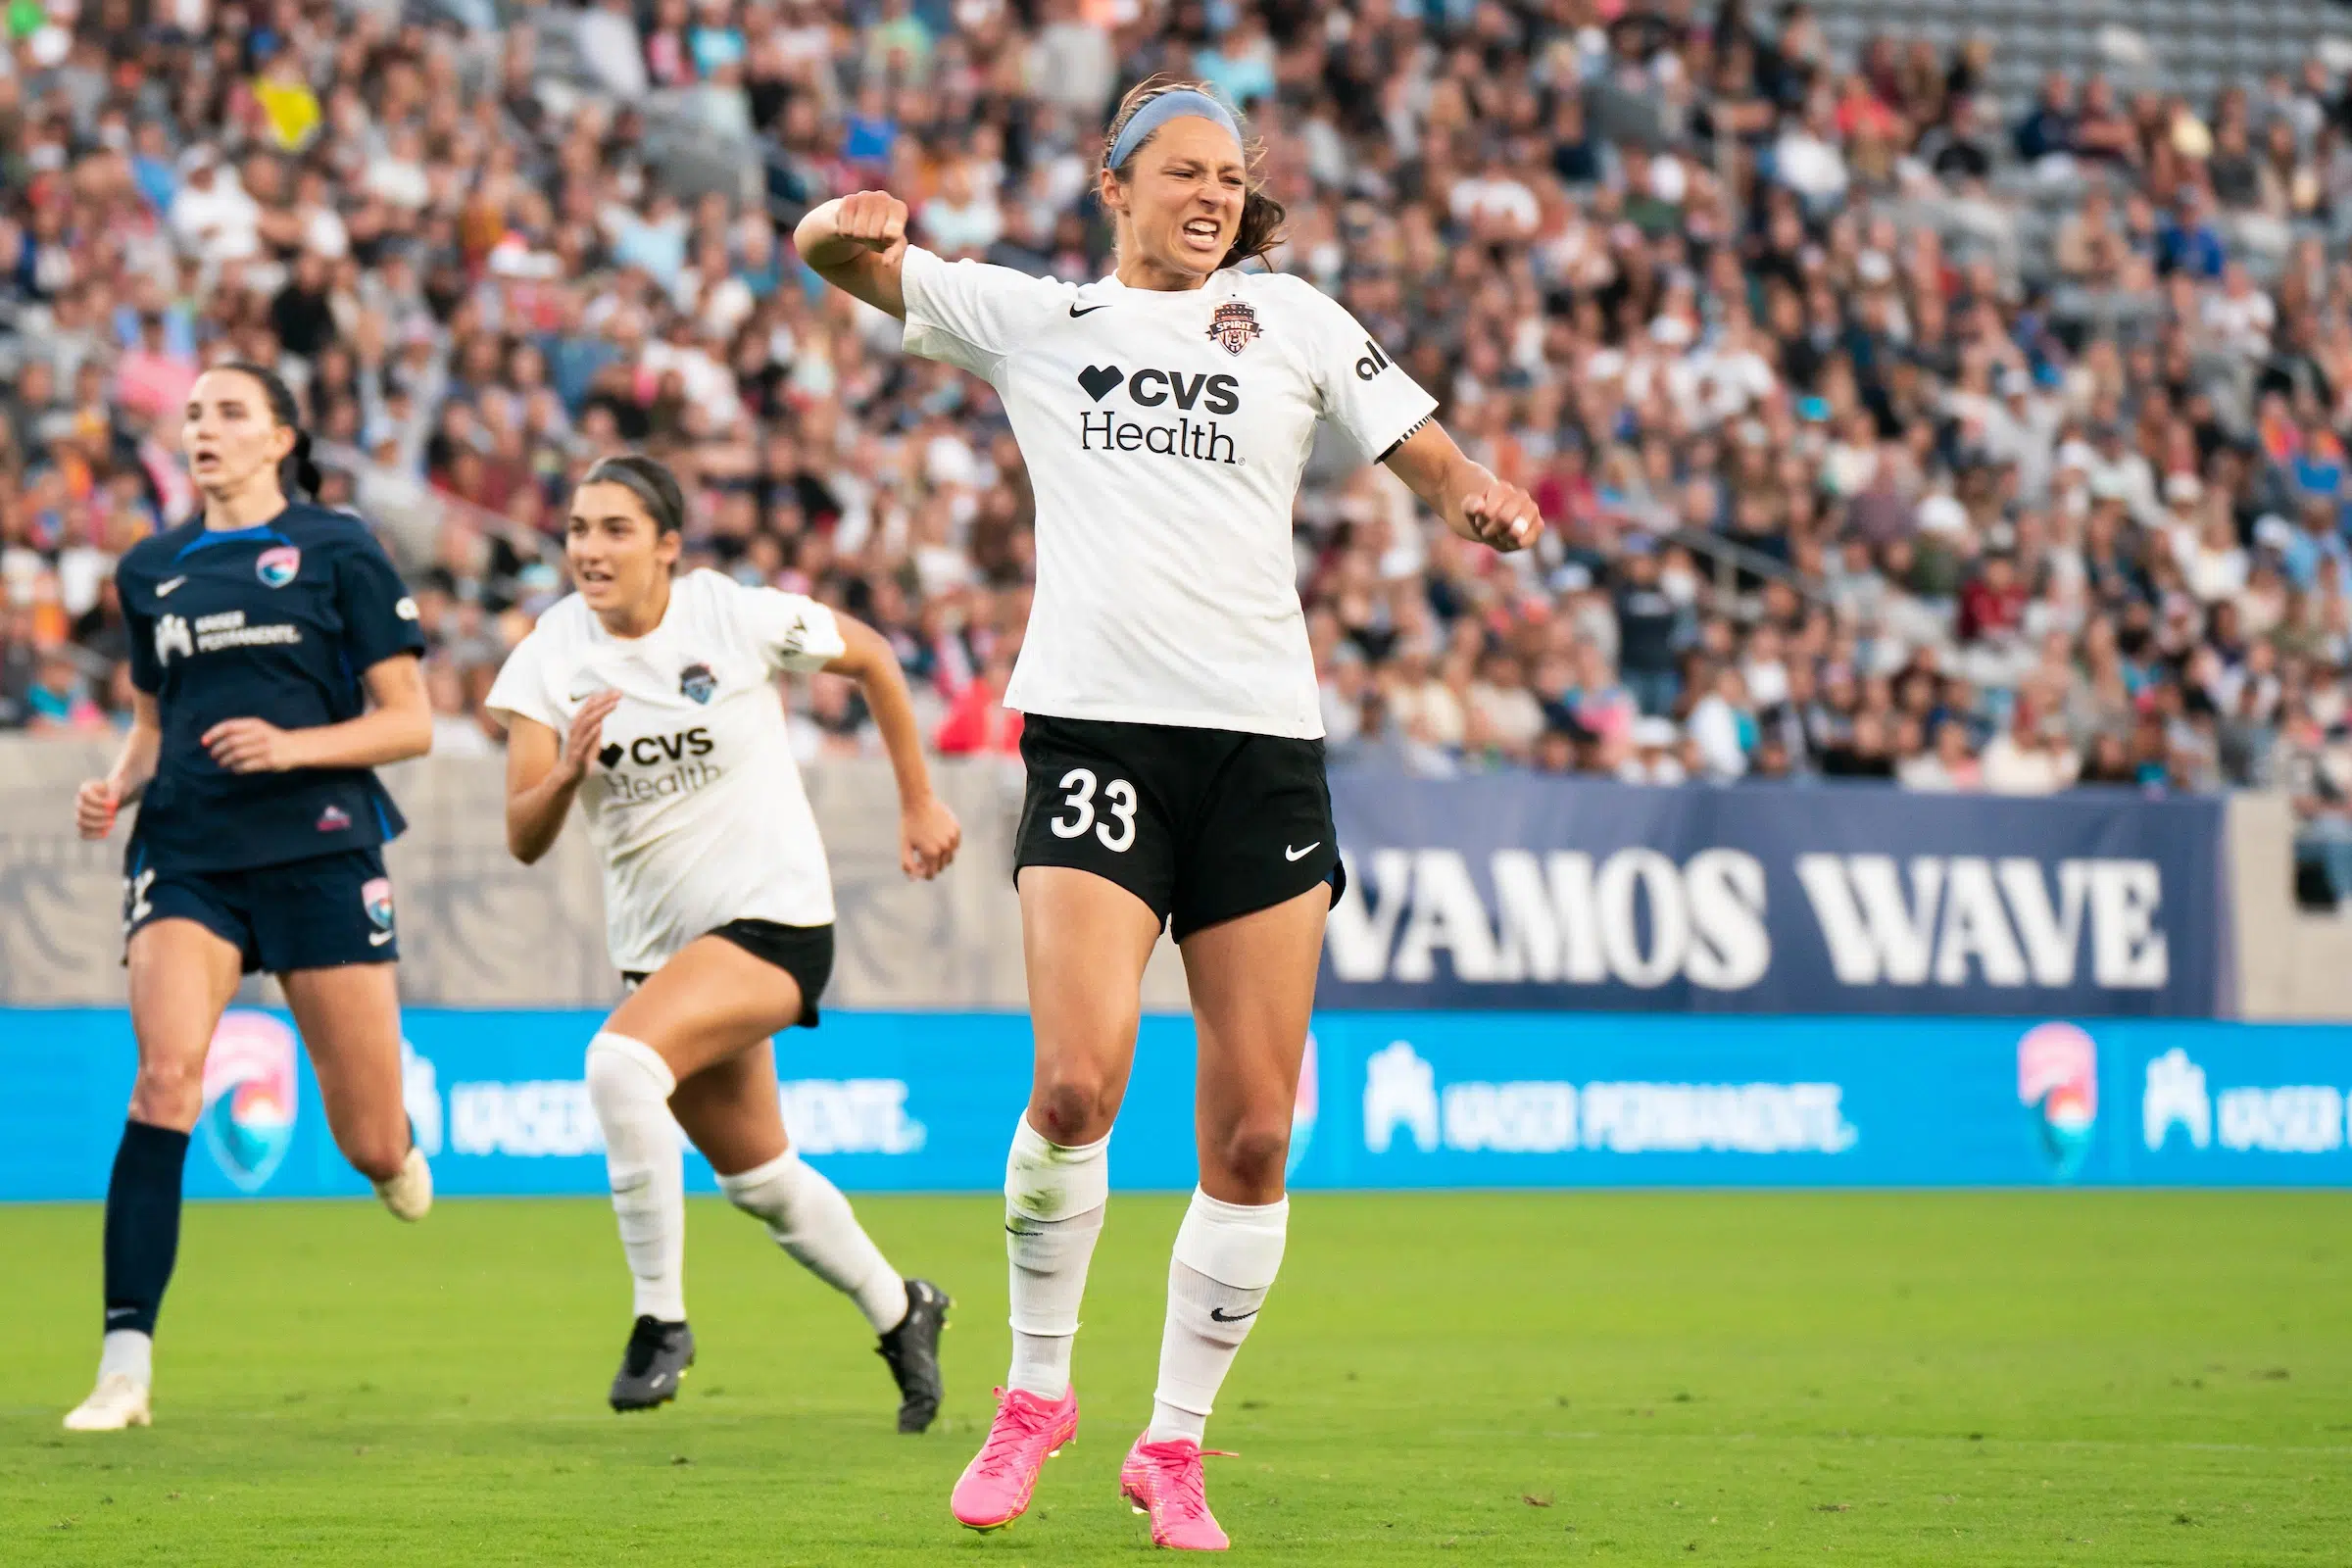 Ashley Hatch in a white top, black shorts, white socks and pink cleats pumps her fist in celebration.